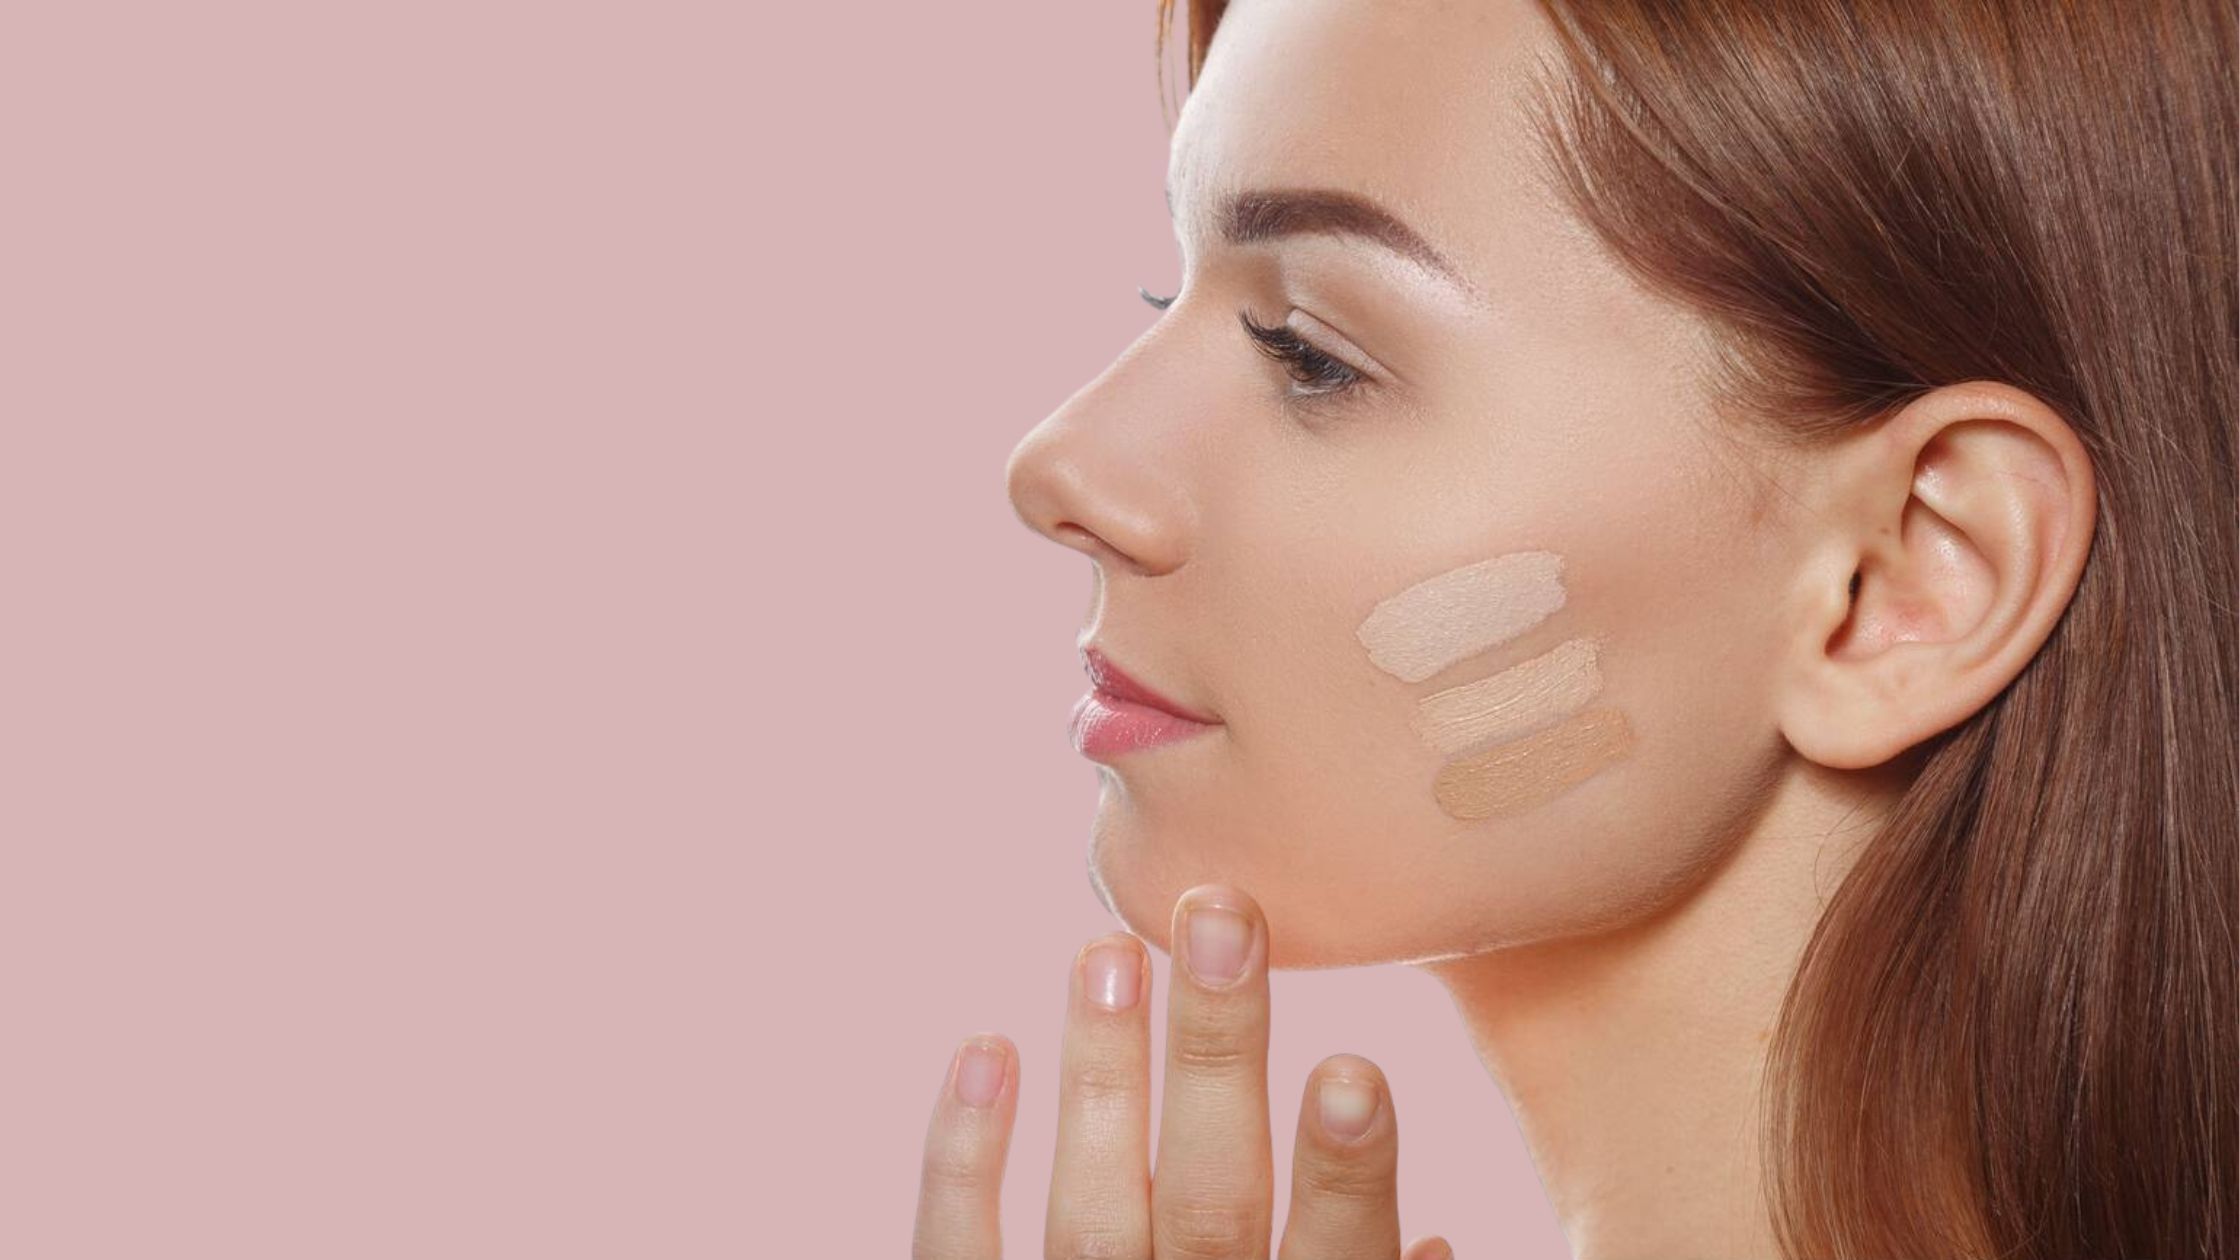 Finding the Best Foundations for Different Skin Concerns